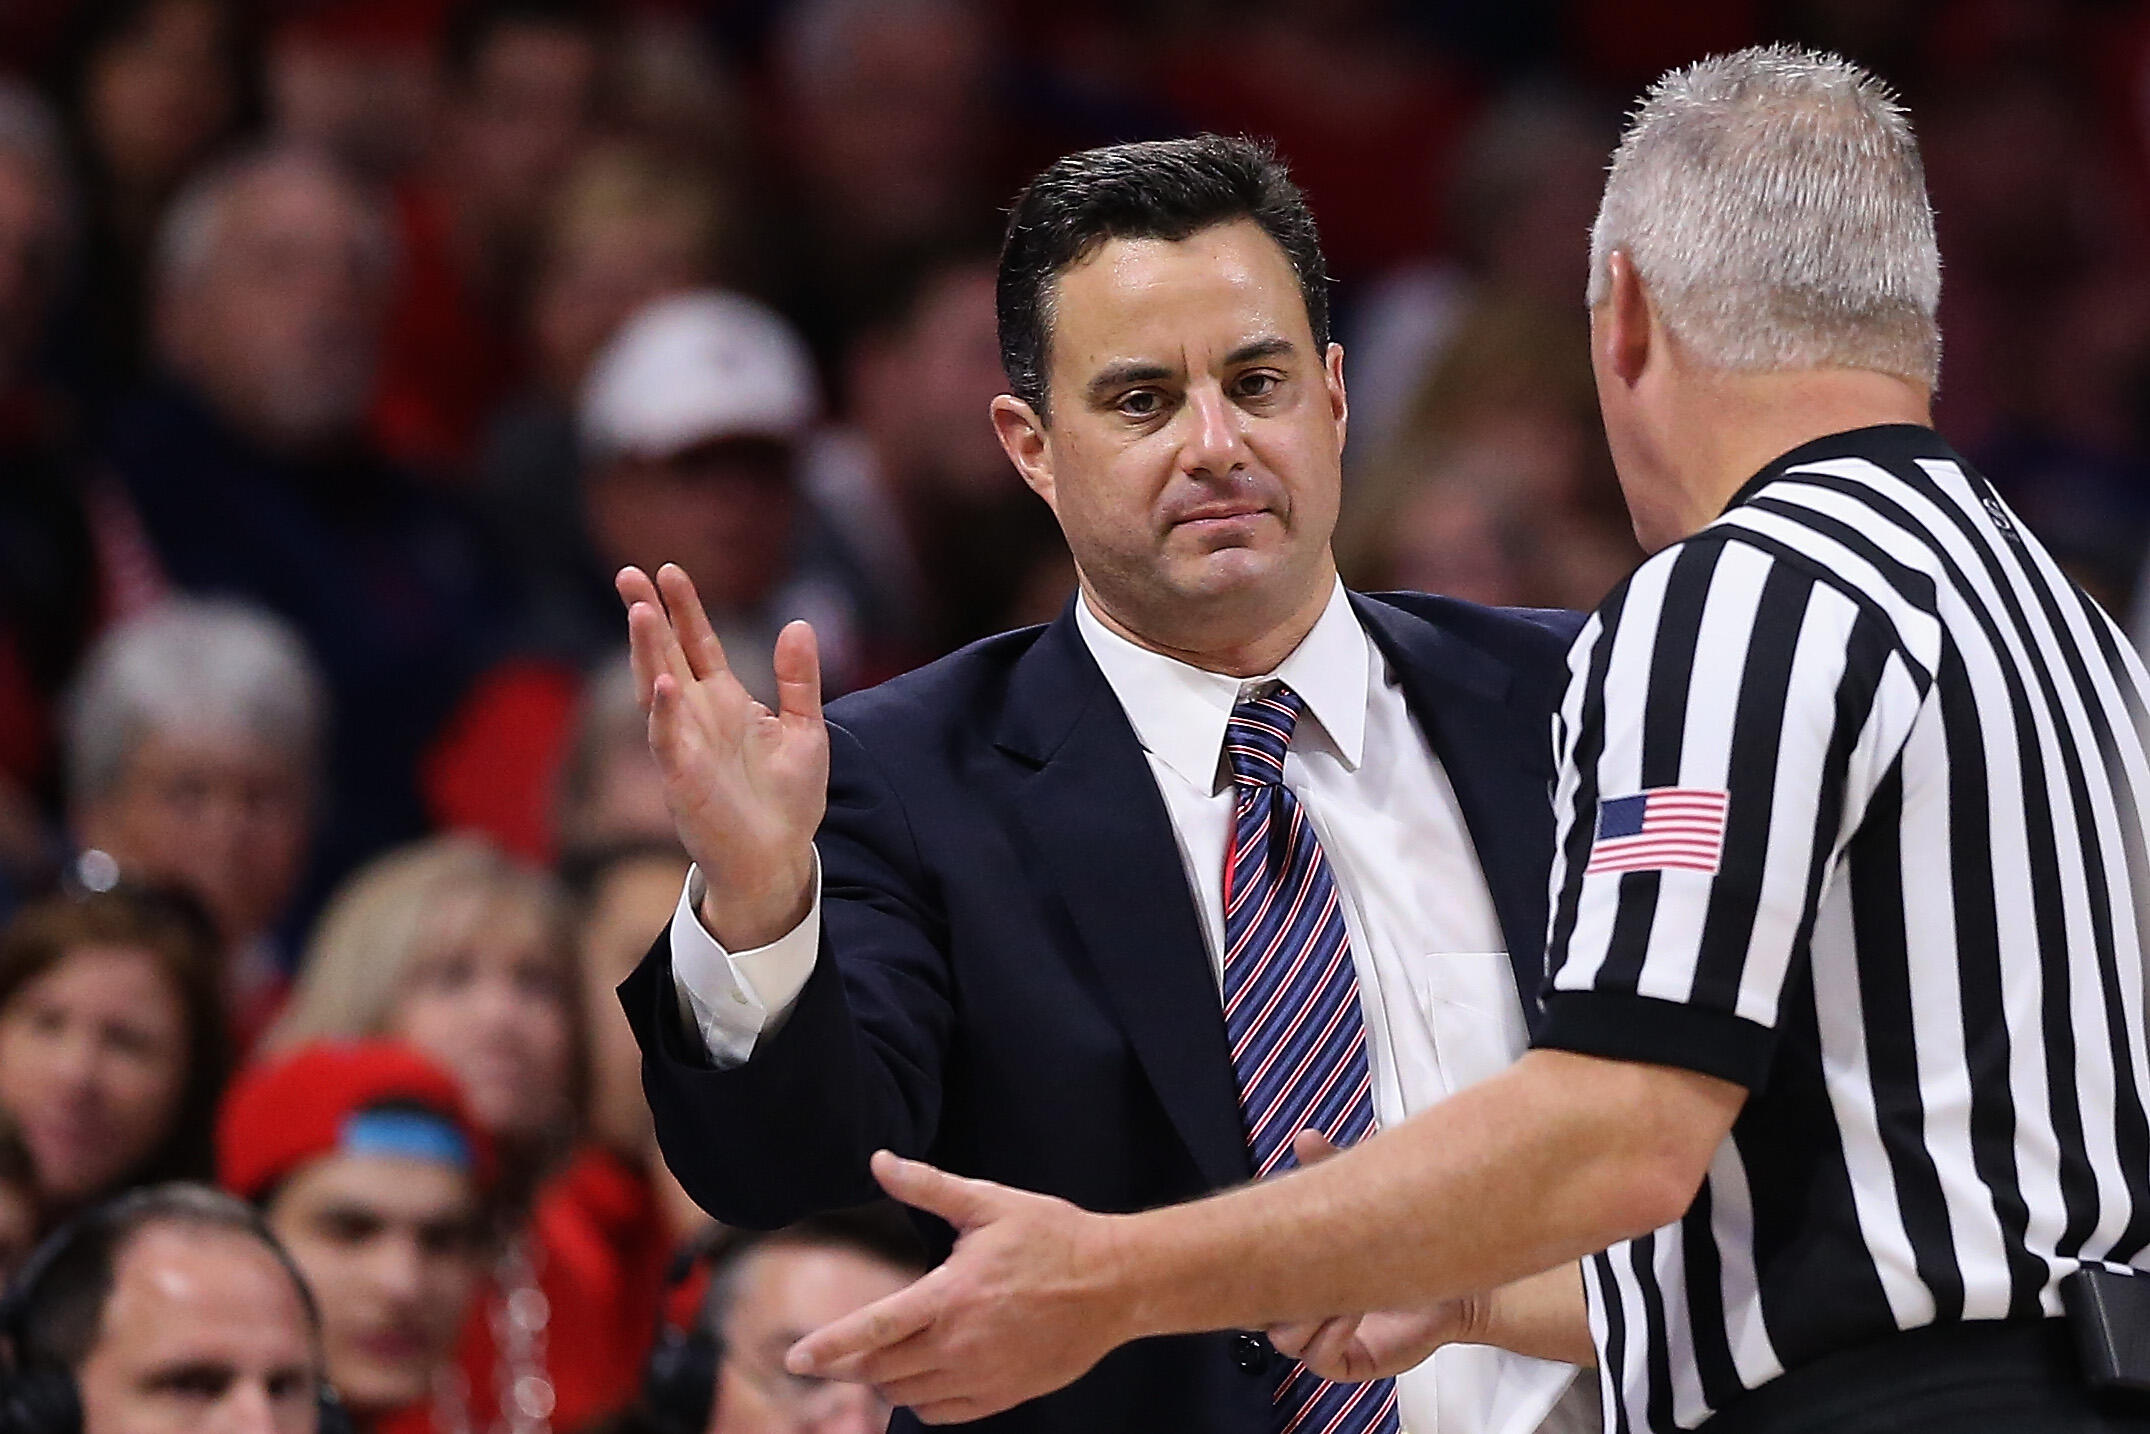 TUCSON, AZ - JANUARY 29:  Head coach Sean Miller of the Arizona Wildcats reacts to a referee during the first half of the college basketball game against the Washington Huskies at McKale Center on January 29, 2017 in Tucson, Arizona.  (Photo by Christian 